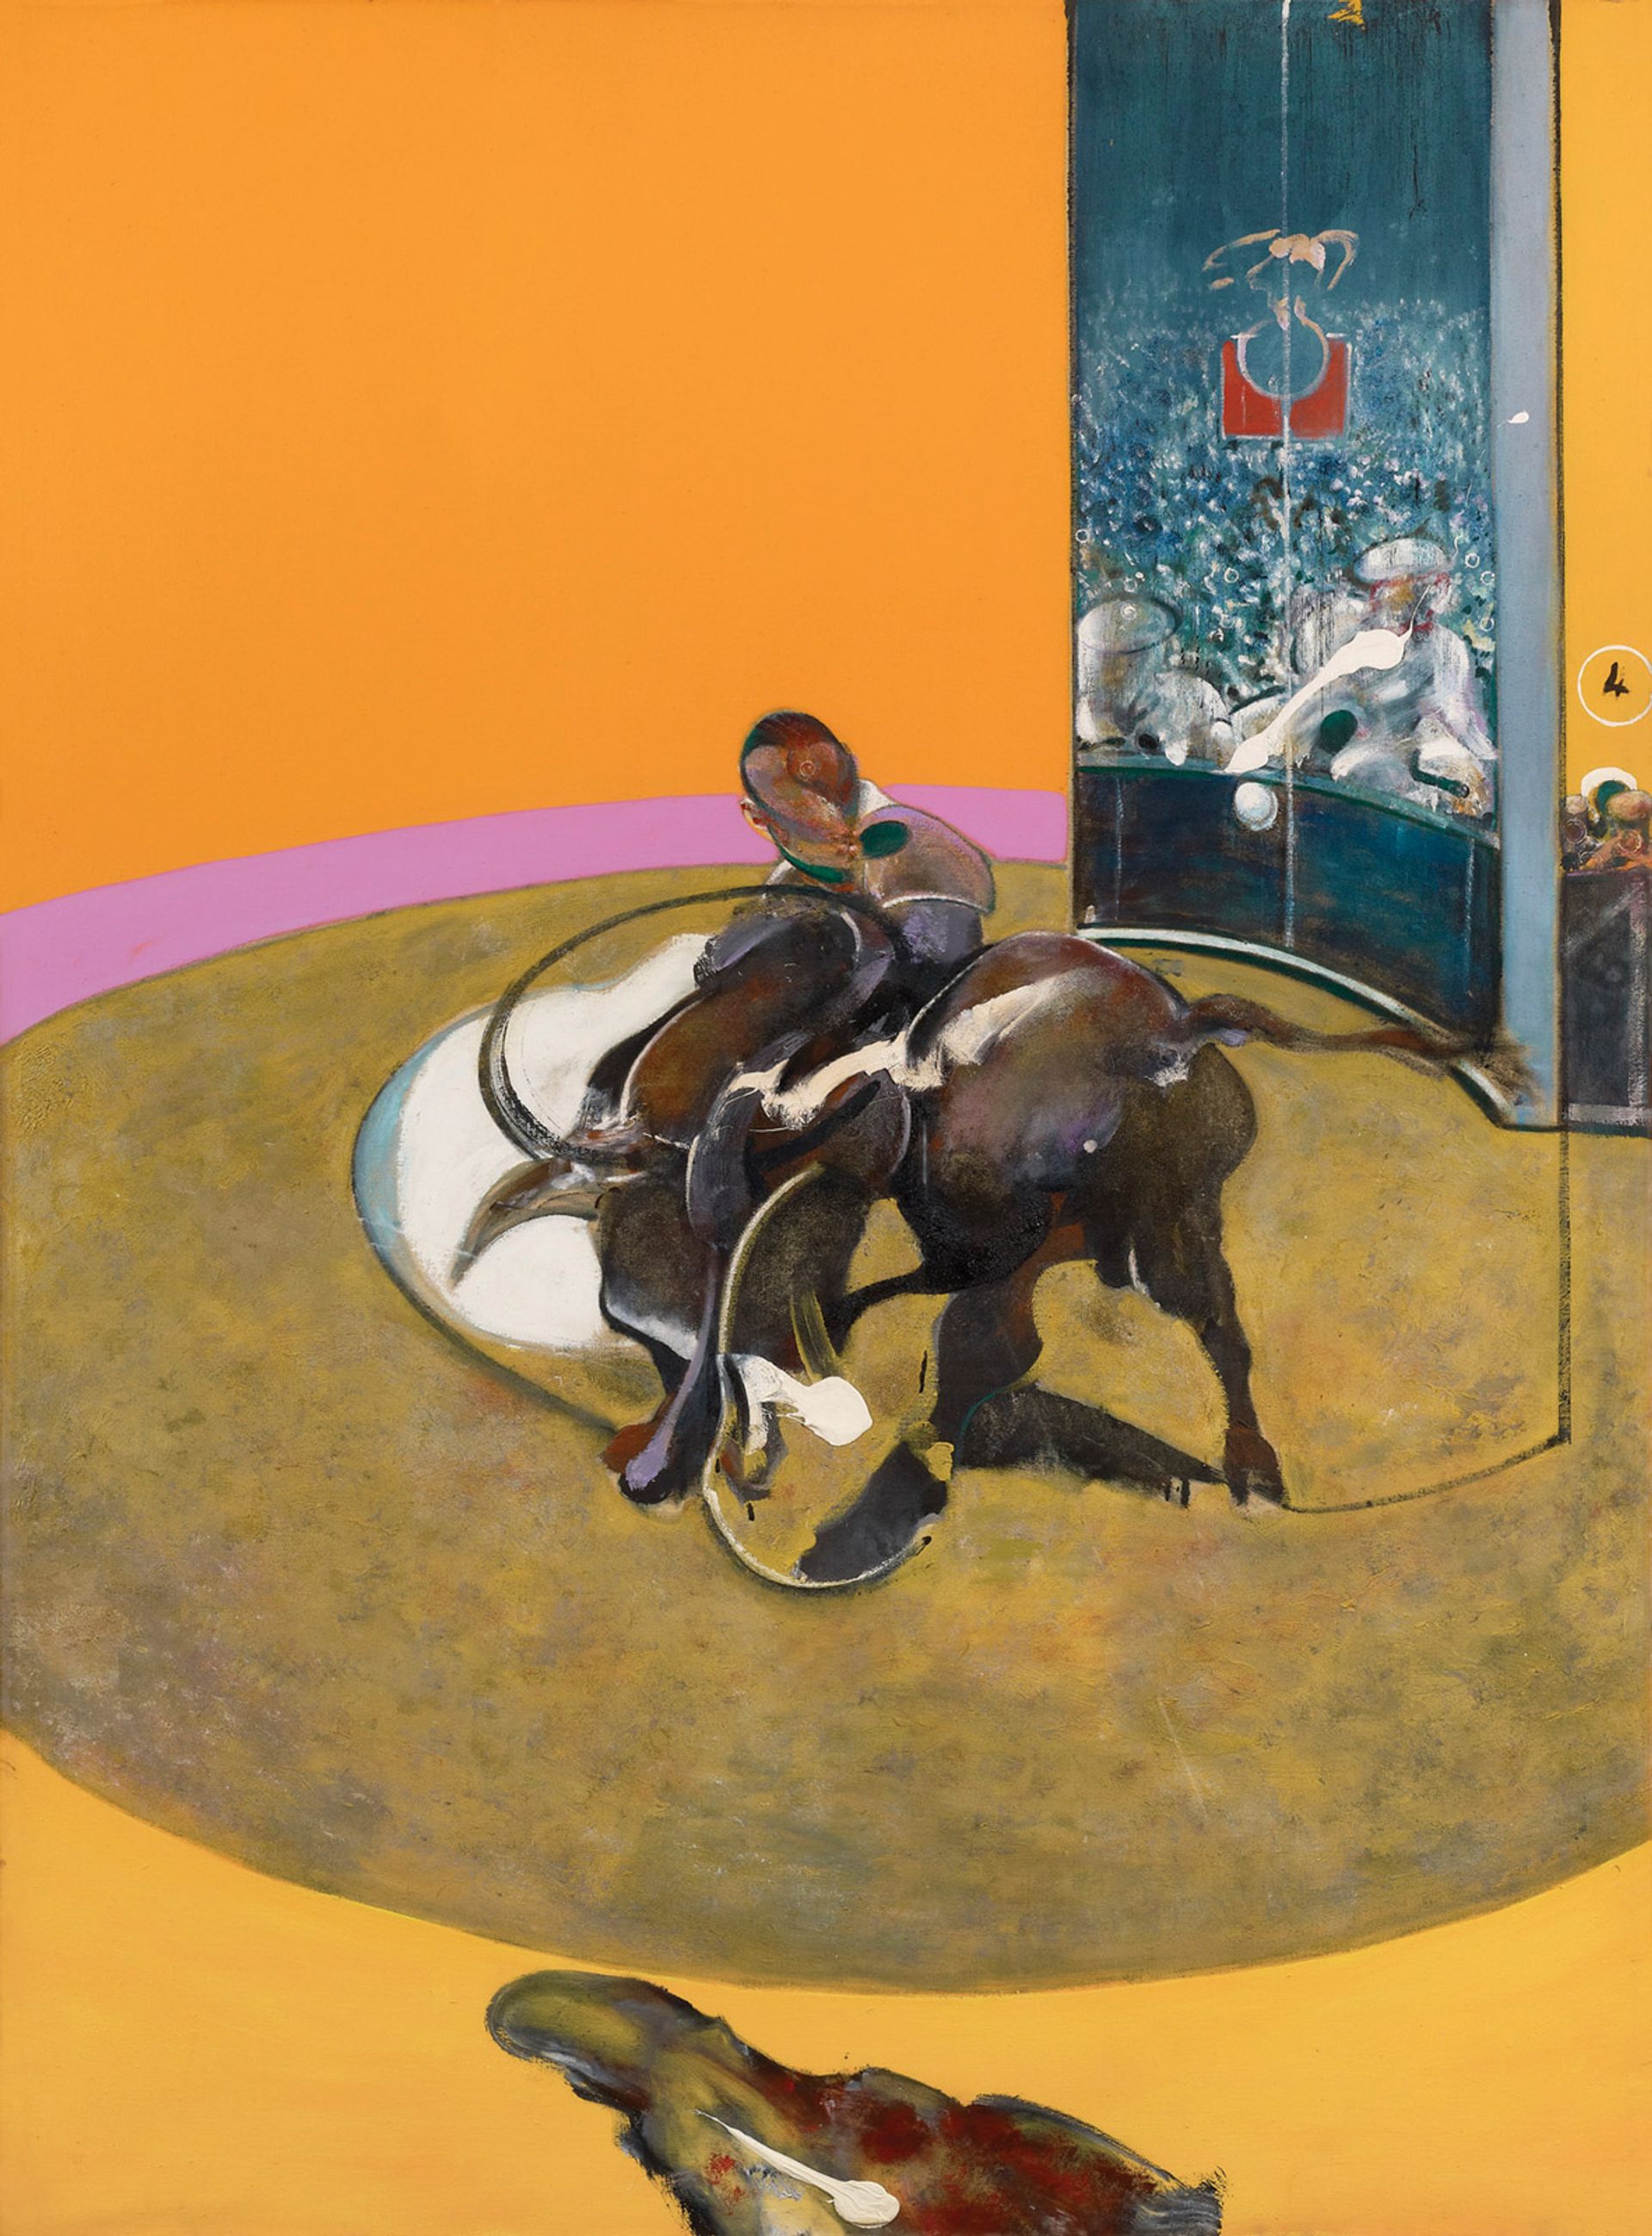 Francis Bacon’s Study for Bullfight No. 1 (1969). The show will include all of the artist’s bullfighting paintings Photo: Prudence Cuming Associates © Estate of Francis Bacon; DACS/Artimage 2021


